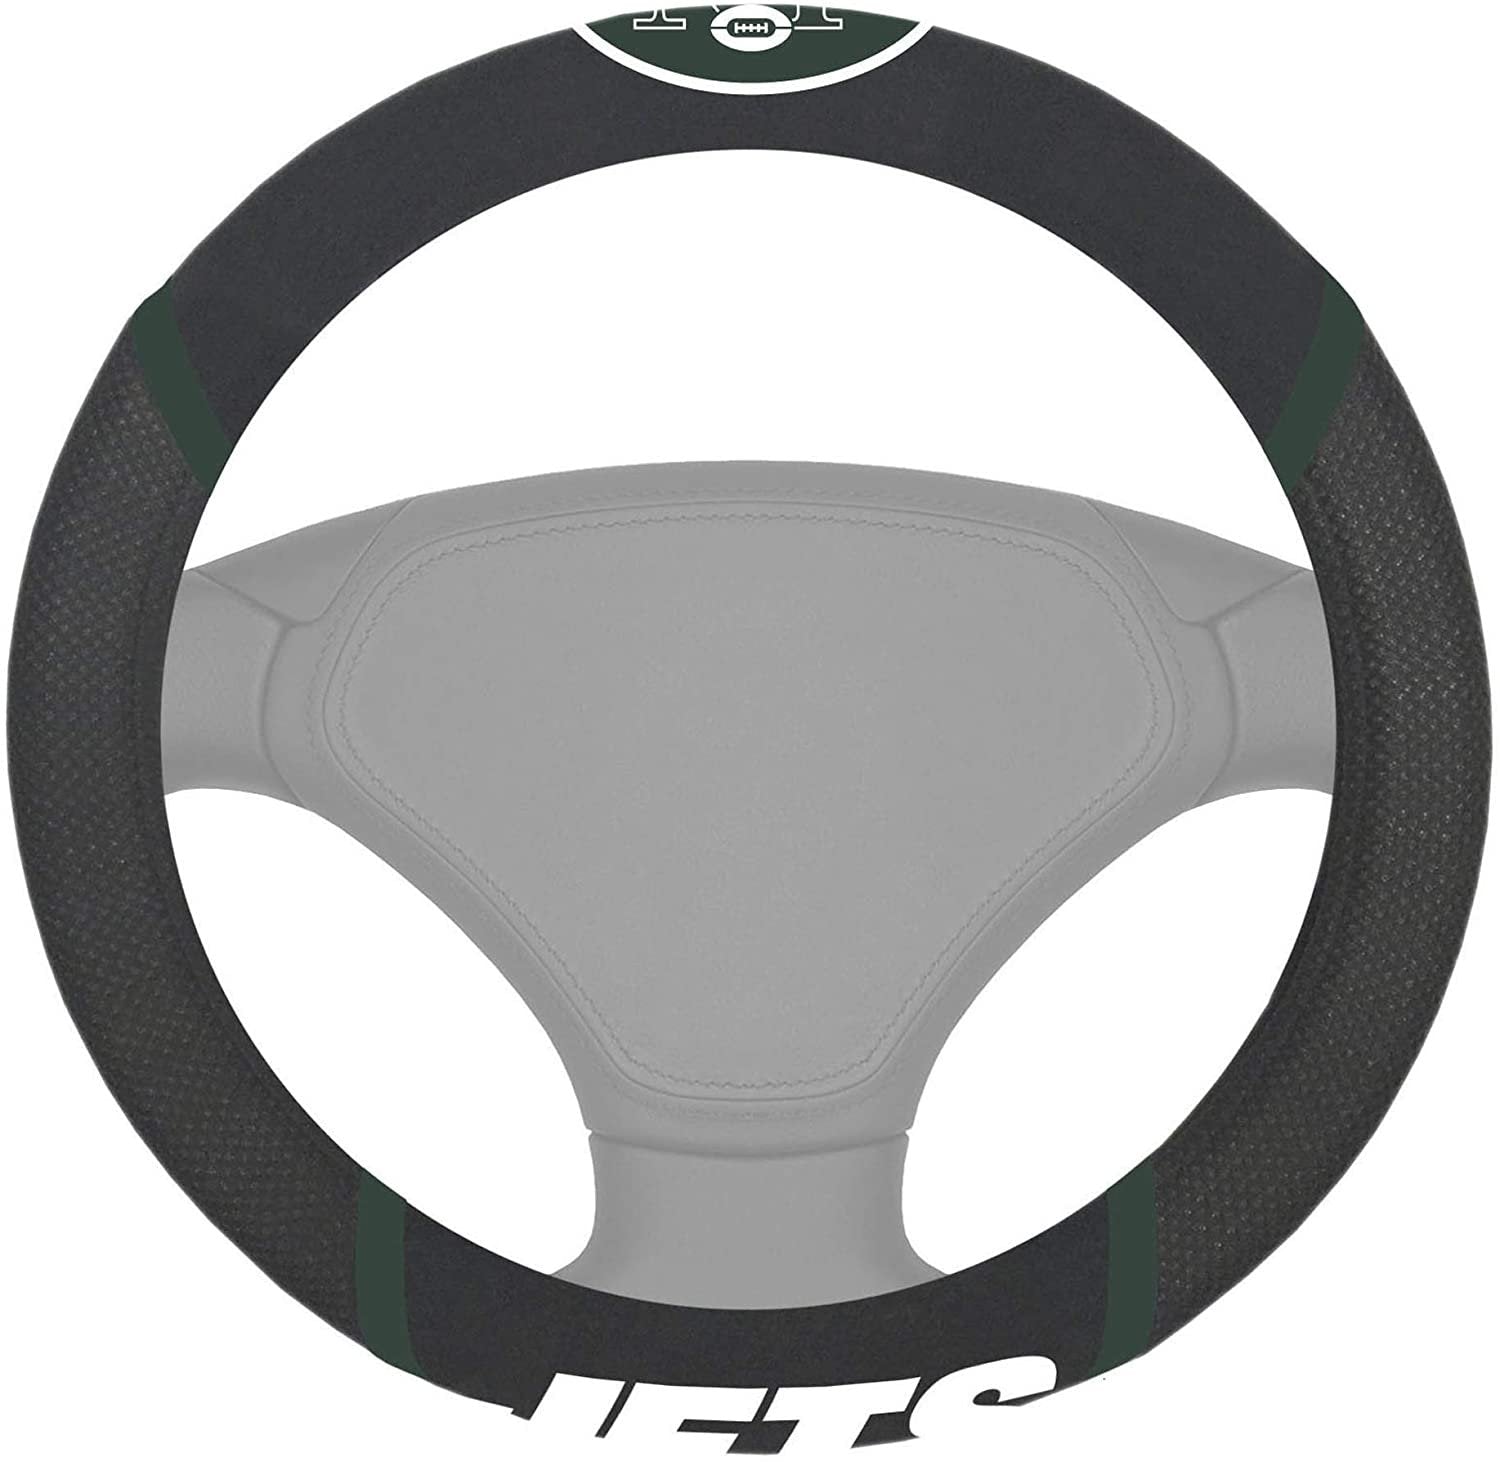 New York Jets Steering Wheel Cover Premium Black Embroidered 15 Inch